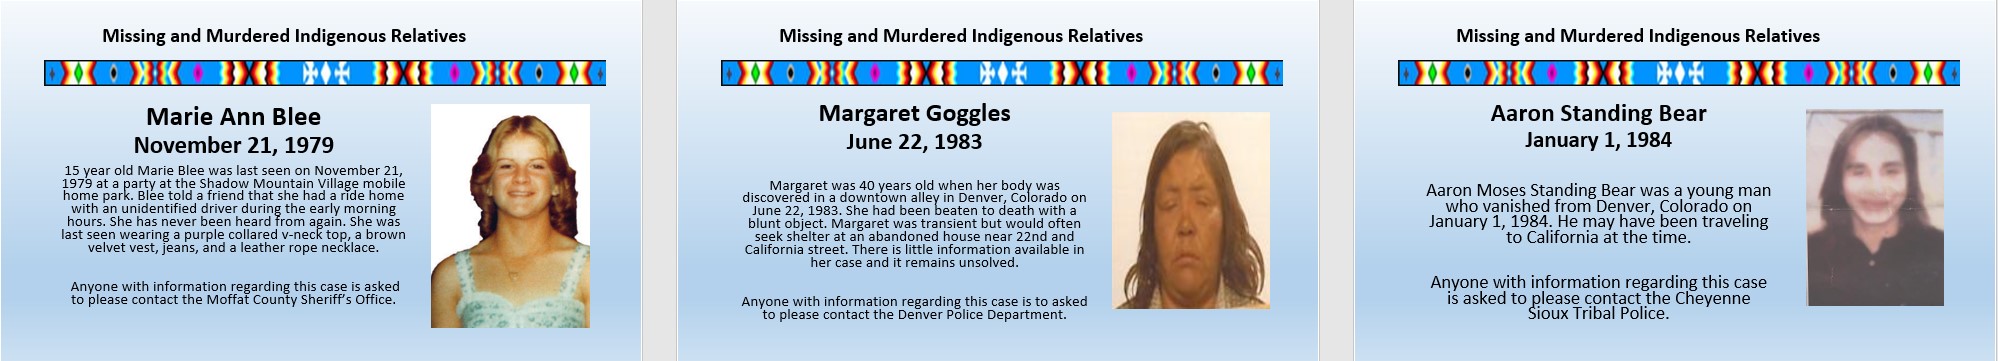 Pictures of three Murdered or Missing Indigenous Persons Marie Ann Blee, Margaret Goggles, Aaron Standing Bear